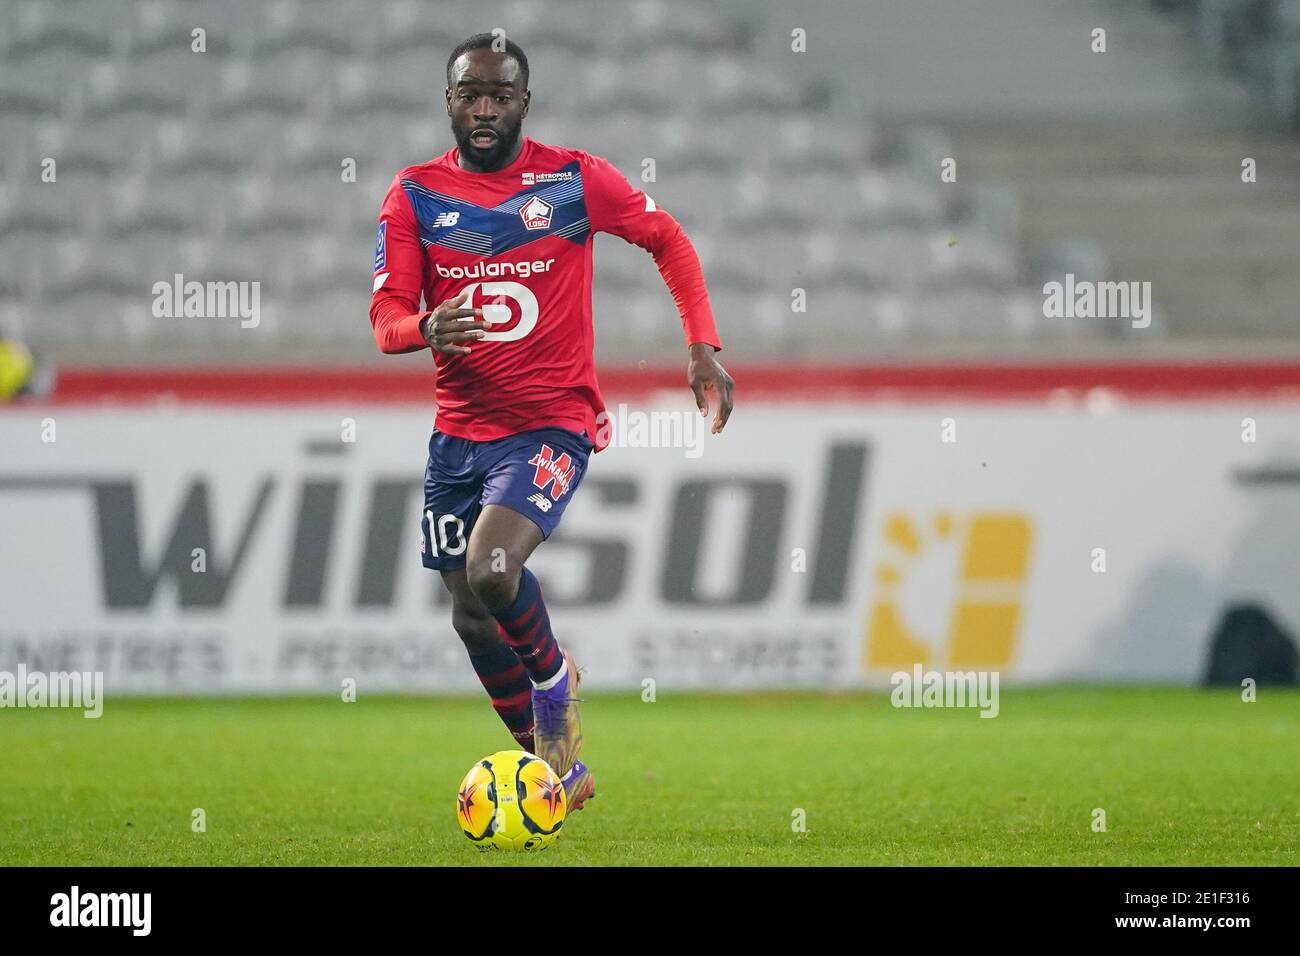 LILLE, FRANCE - JANUARY 6: Jonathan Ikone of Lille OSC during the Ligue 1 match between Lille OSC and Angers SCO at Stade Pierre Mauroy on January 6, 2021 in Lille, France (Photo by Jeroen Meuwsen/BSR Agency/Alamy Live News)*** Local Caption *** Jonathan Ikone Stock Photo